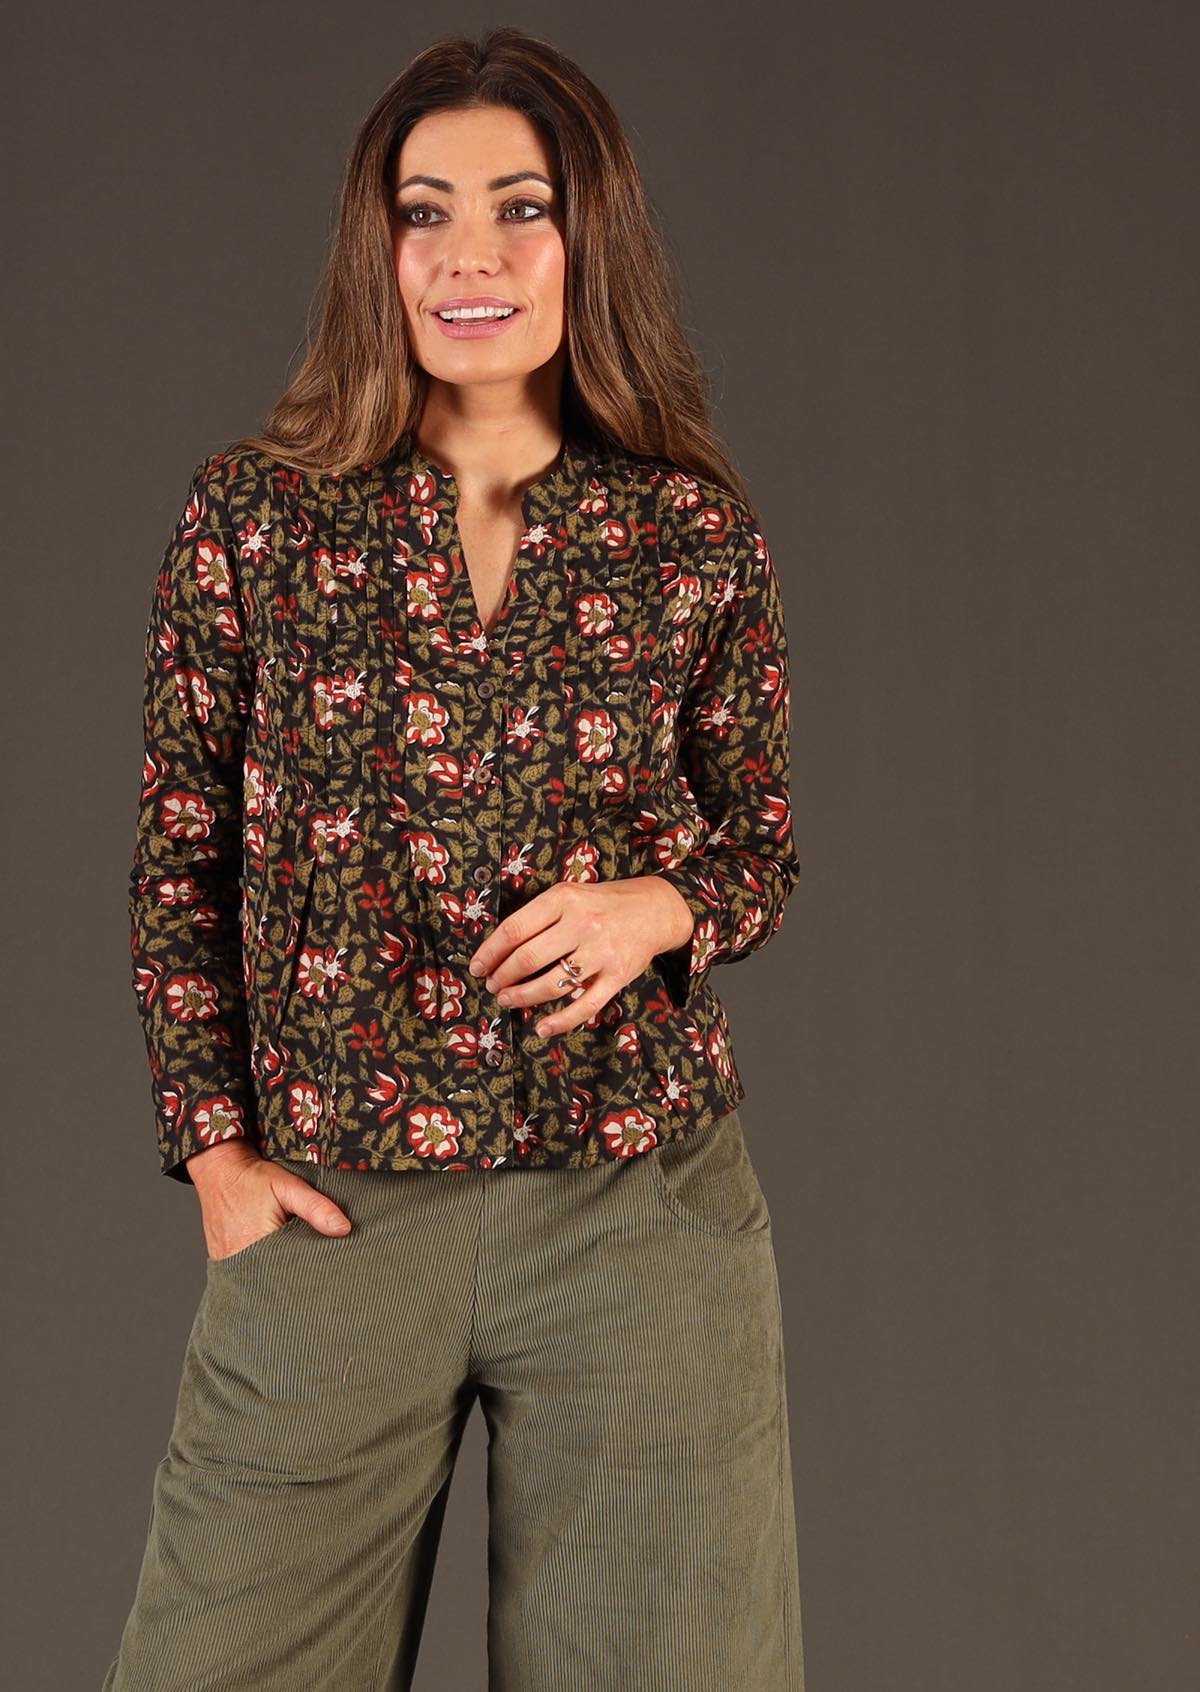 Model in Asha Top Wild Rose black floral print cotton blouse worn with green corduroy wide legged pants